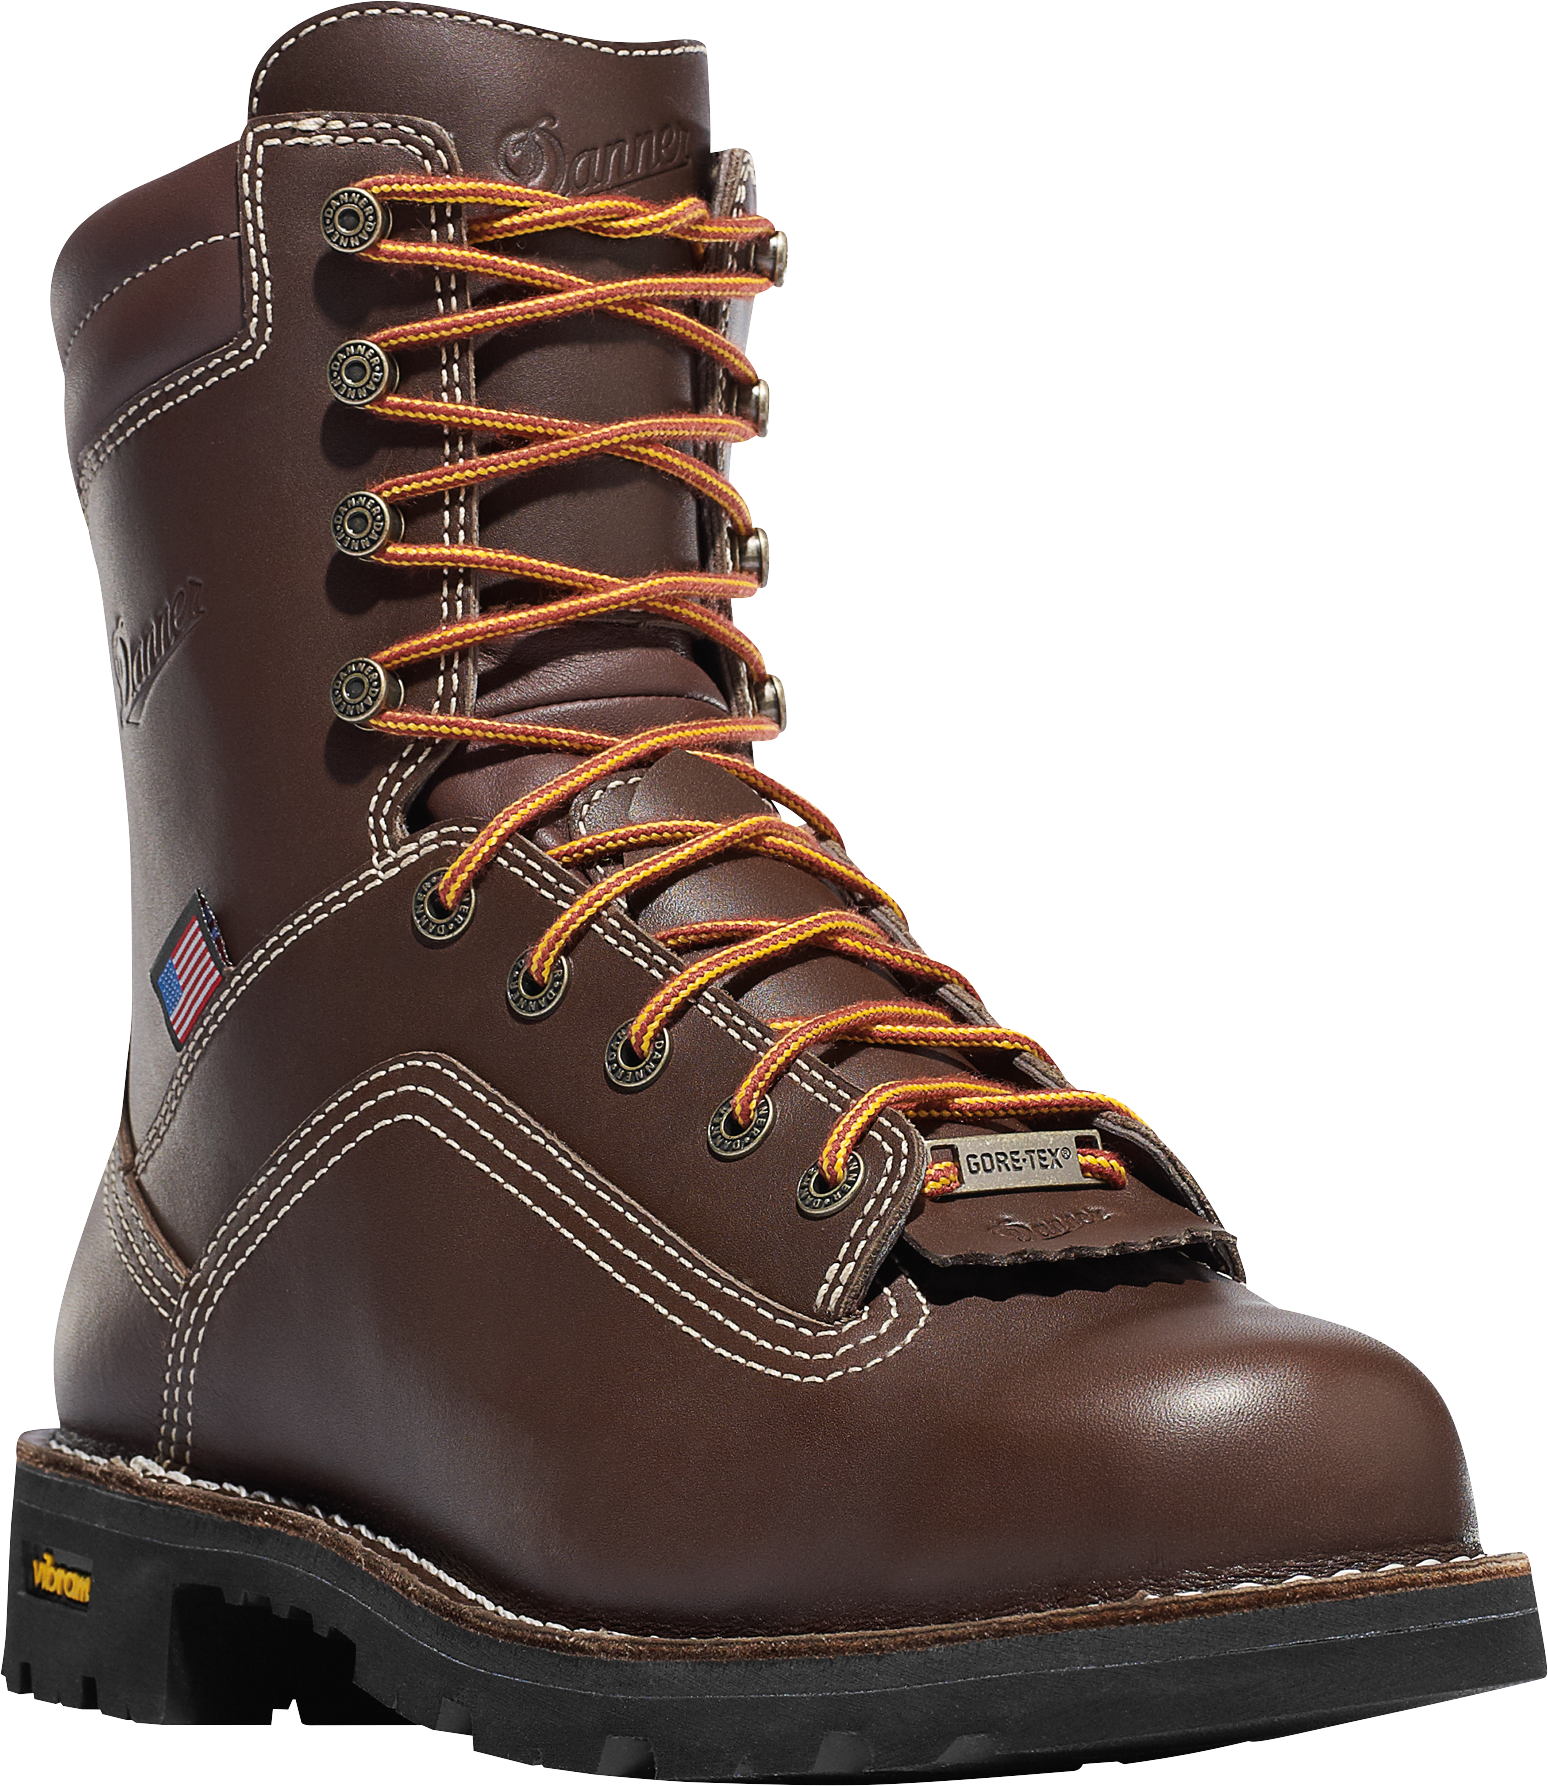 Danner Quarry USA Brown GORE-TEX Alloy Toe Work Boots for Men - Brown - 7M